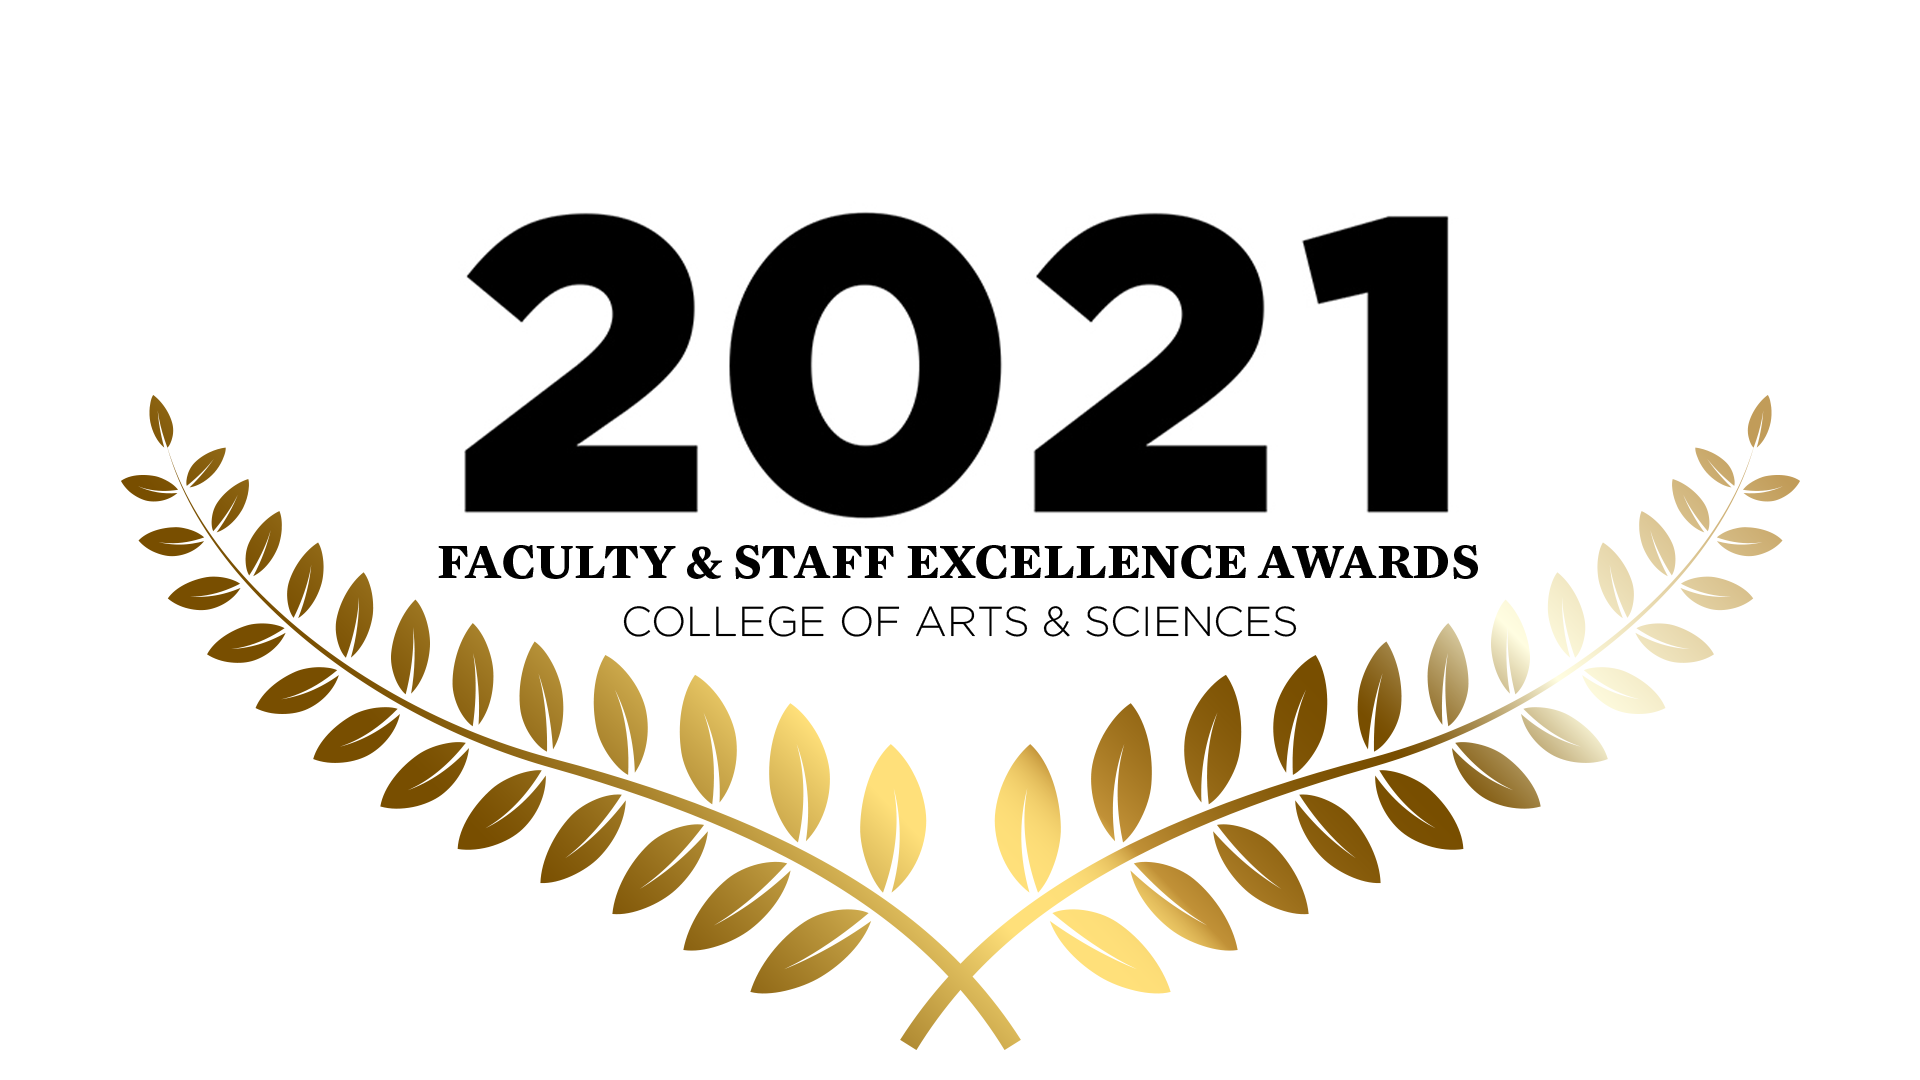 Faculty & Staff Excellence Award